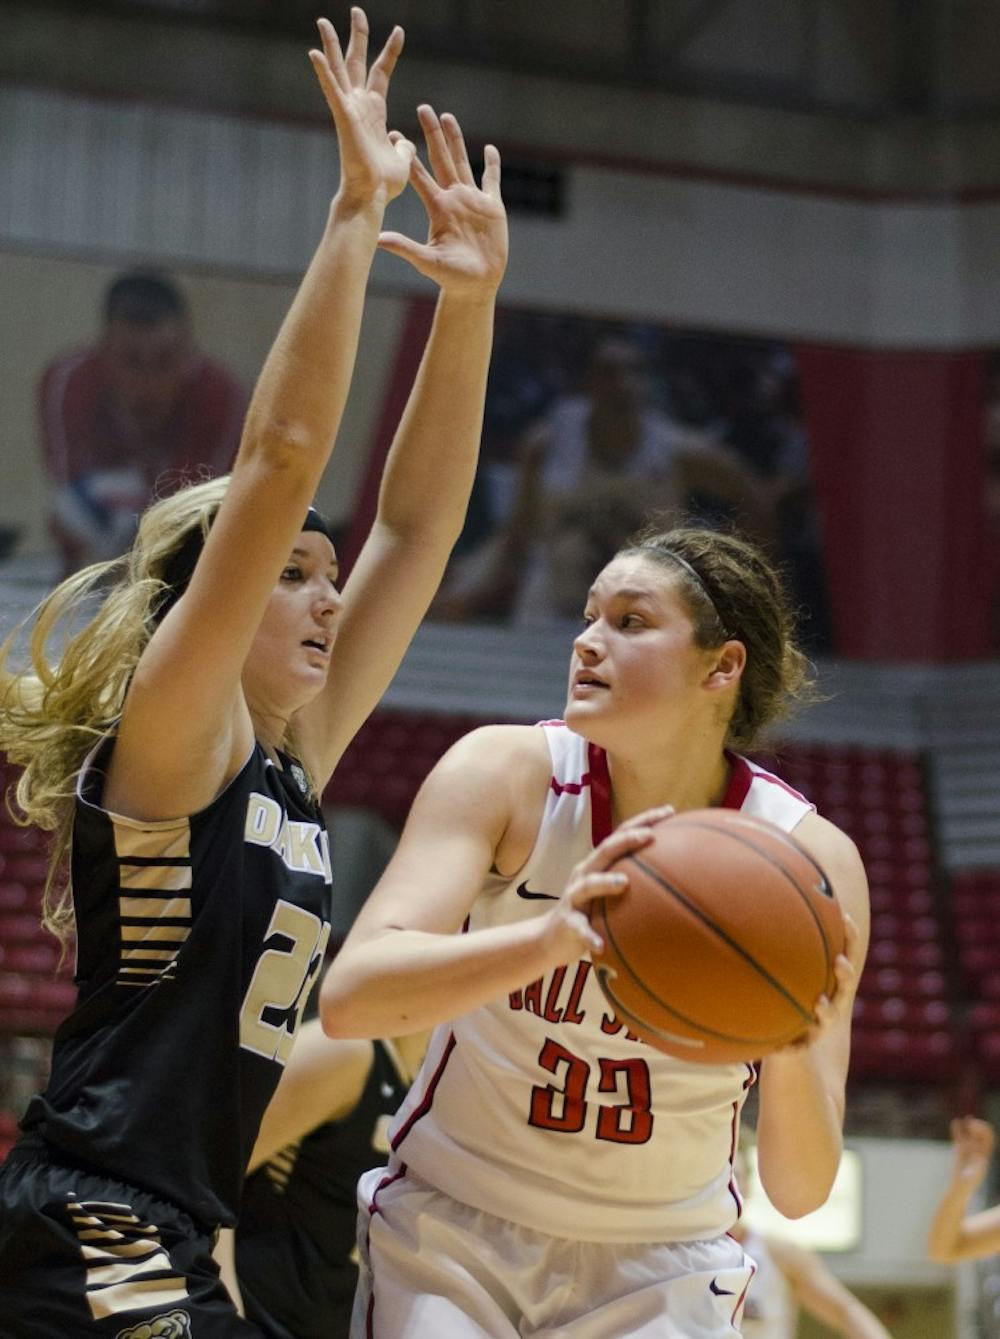 Freshman forward Moriah Monaco looks for a shot during the game against Oakland on Dec. 6 at Worthen Arena. DN PHOTO BREANNA DAUGHERTY